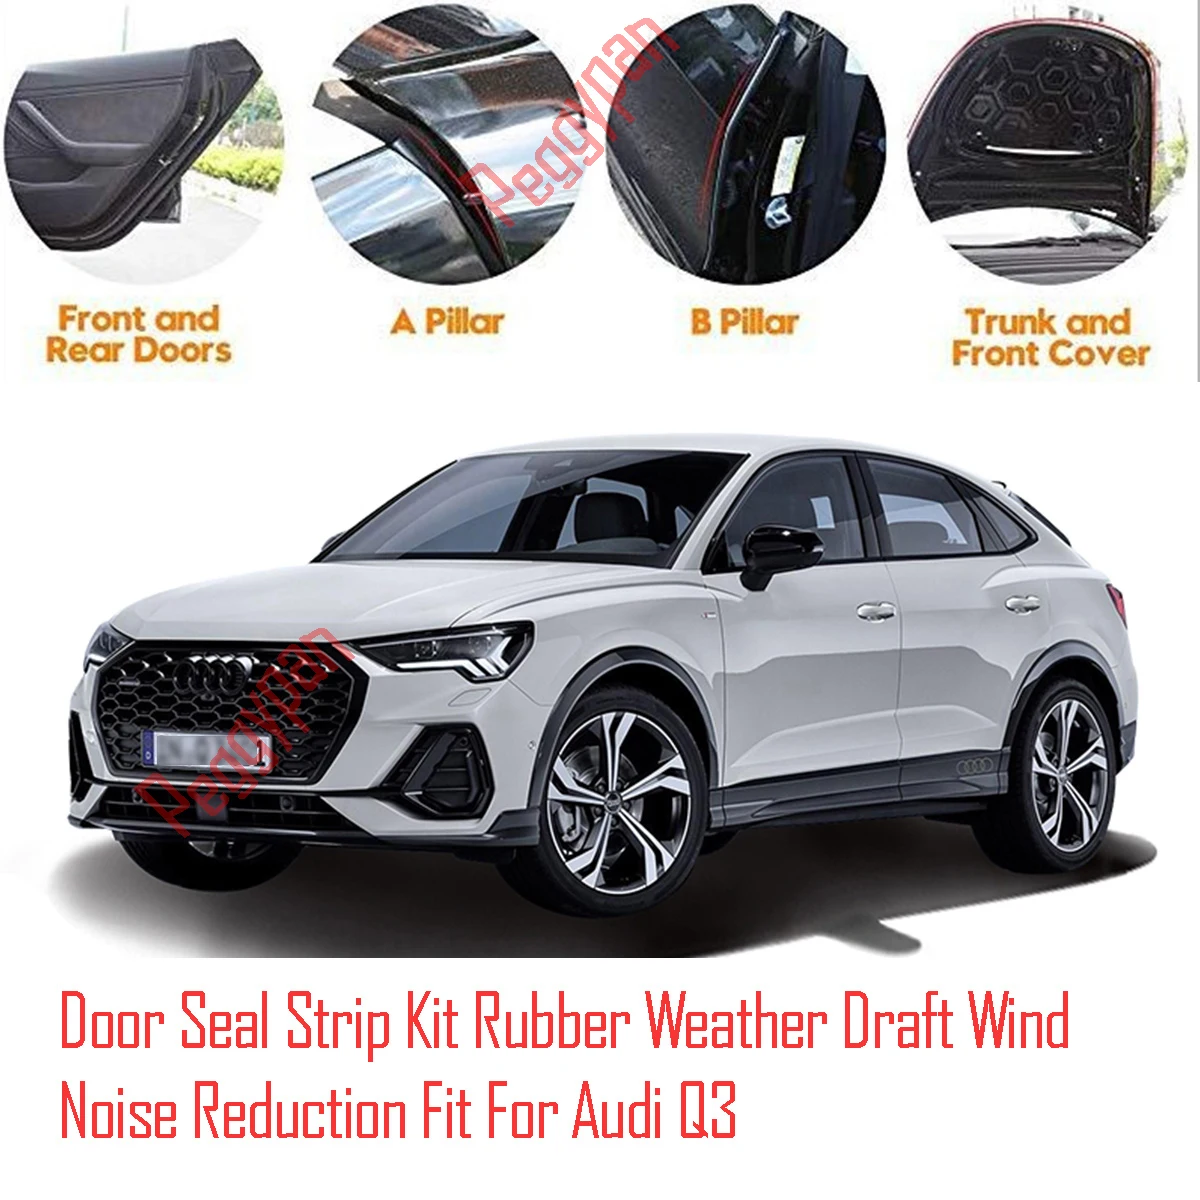 Door Seal Strip Kit Self Adhesive Window Engine Cover Soundproof Rubber Weather Draft Wind Noise Reduction Fit For Audi Q3